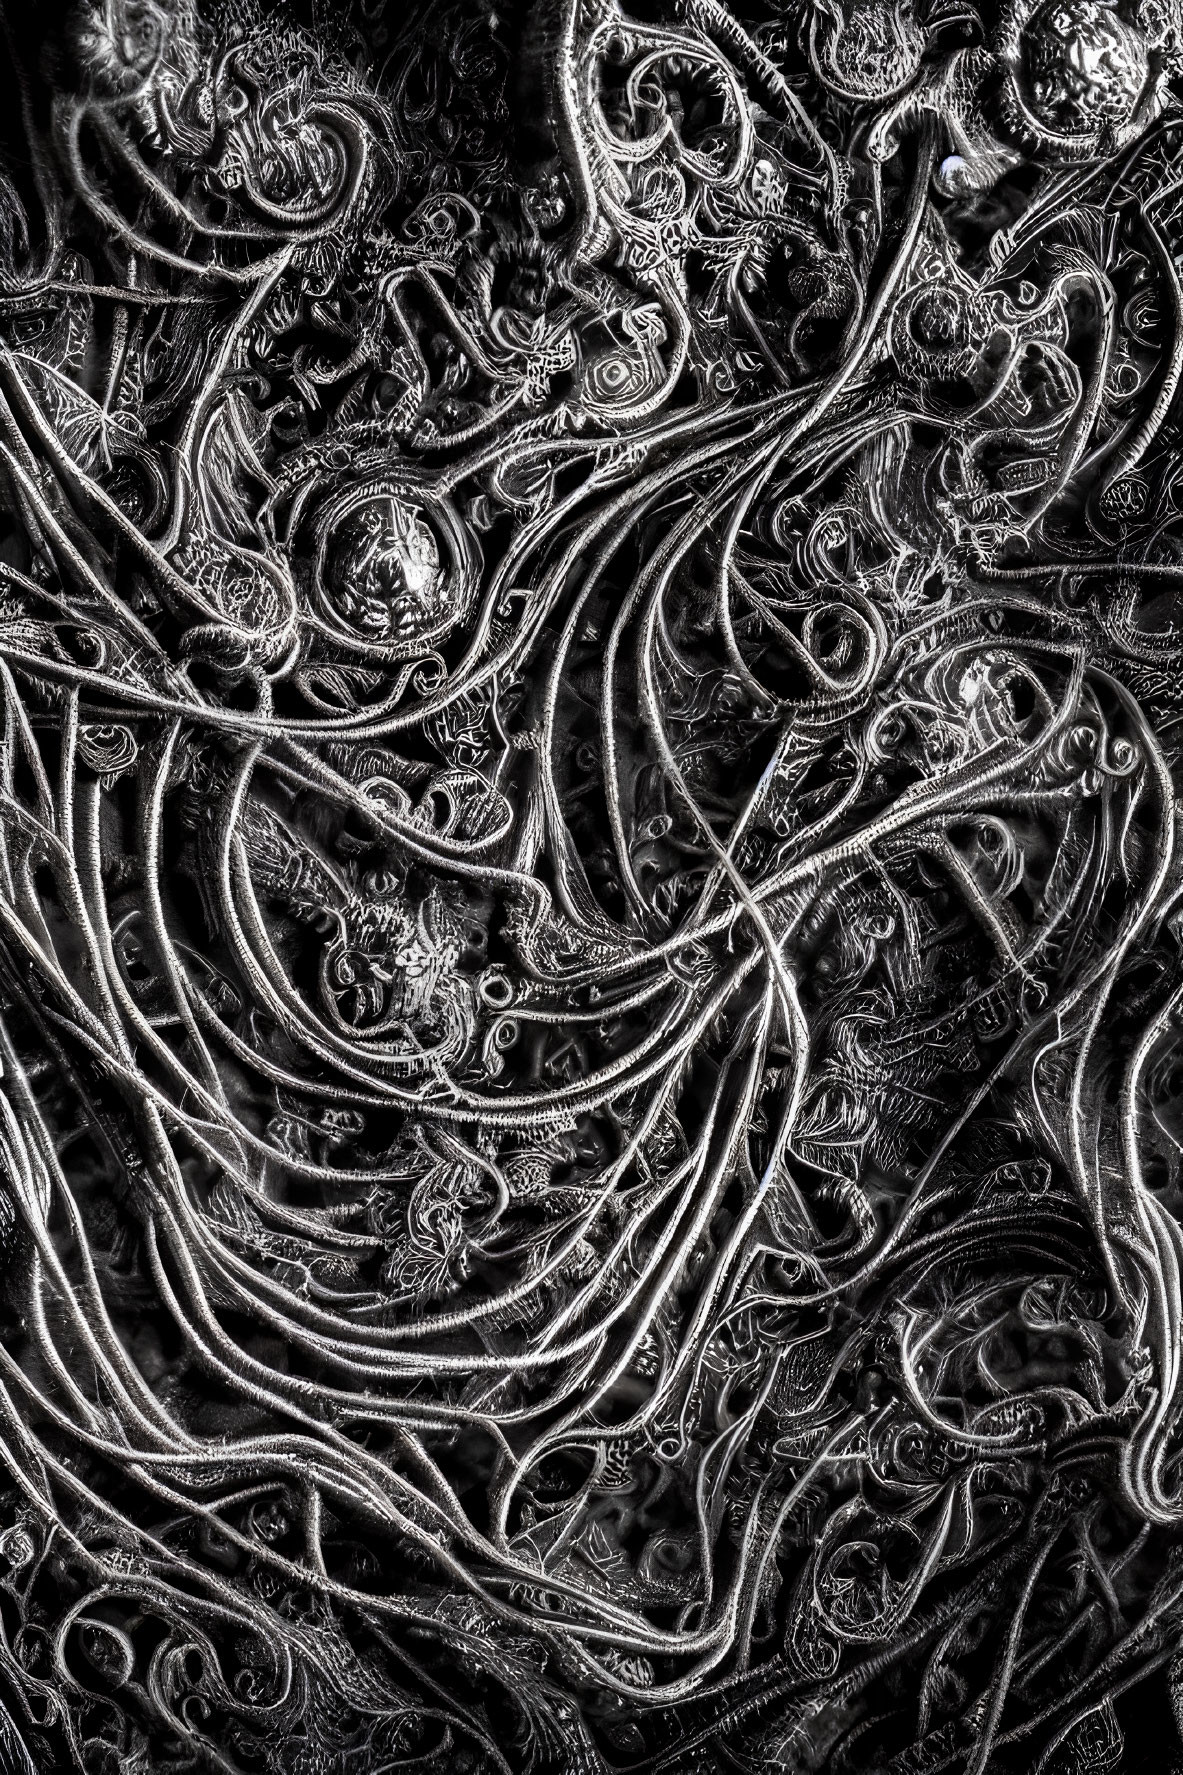 Monochrome image of intricate silver engravings with elaborate swirls